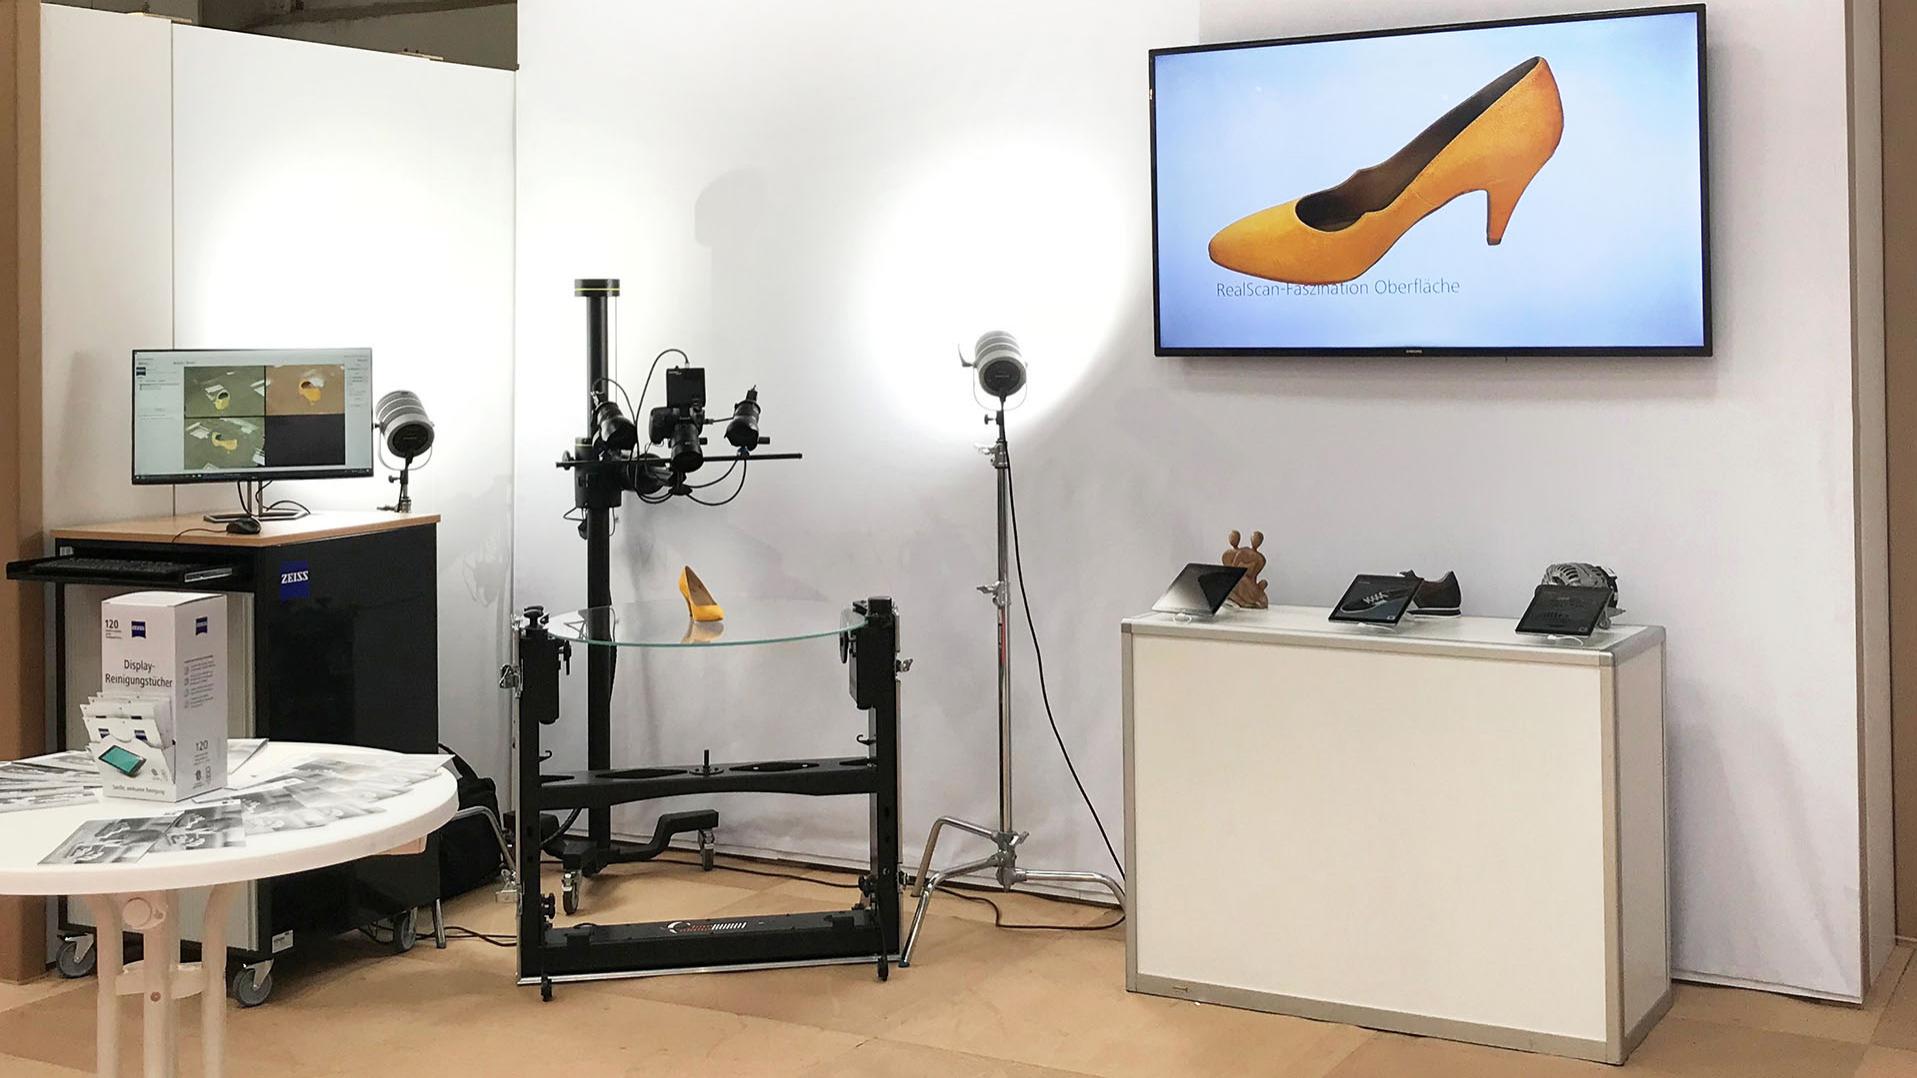 Photorealistic 3D models: ZEISS presents its first-ever photorealistic 3D scanner and 3D scan service at Hannover Messe.